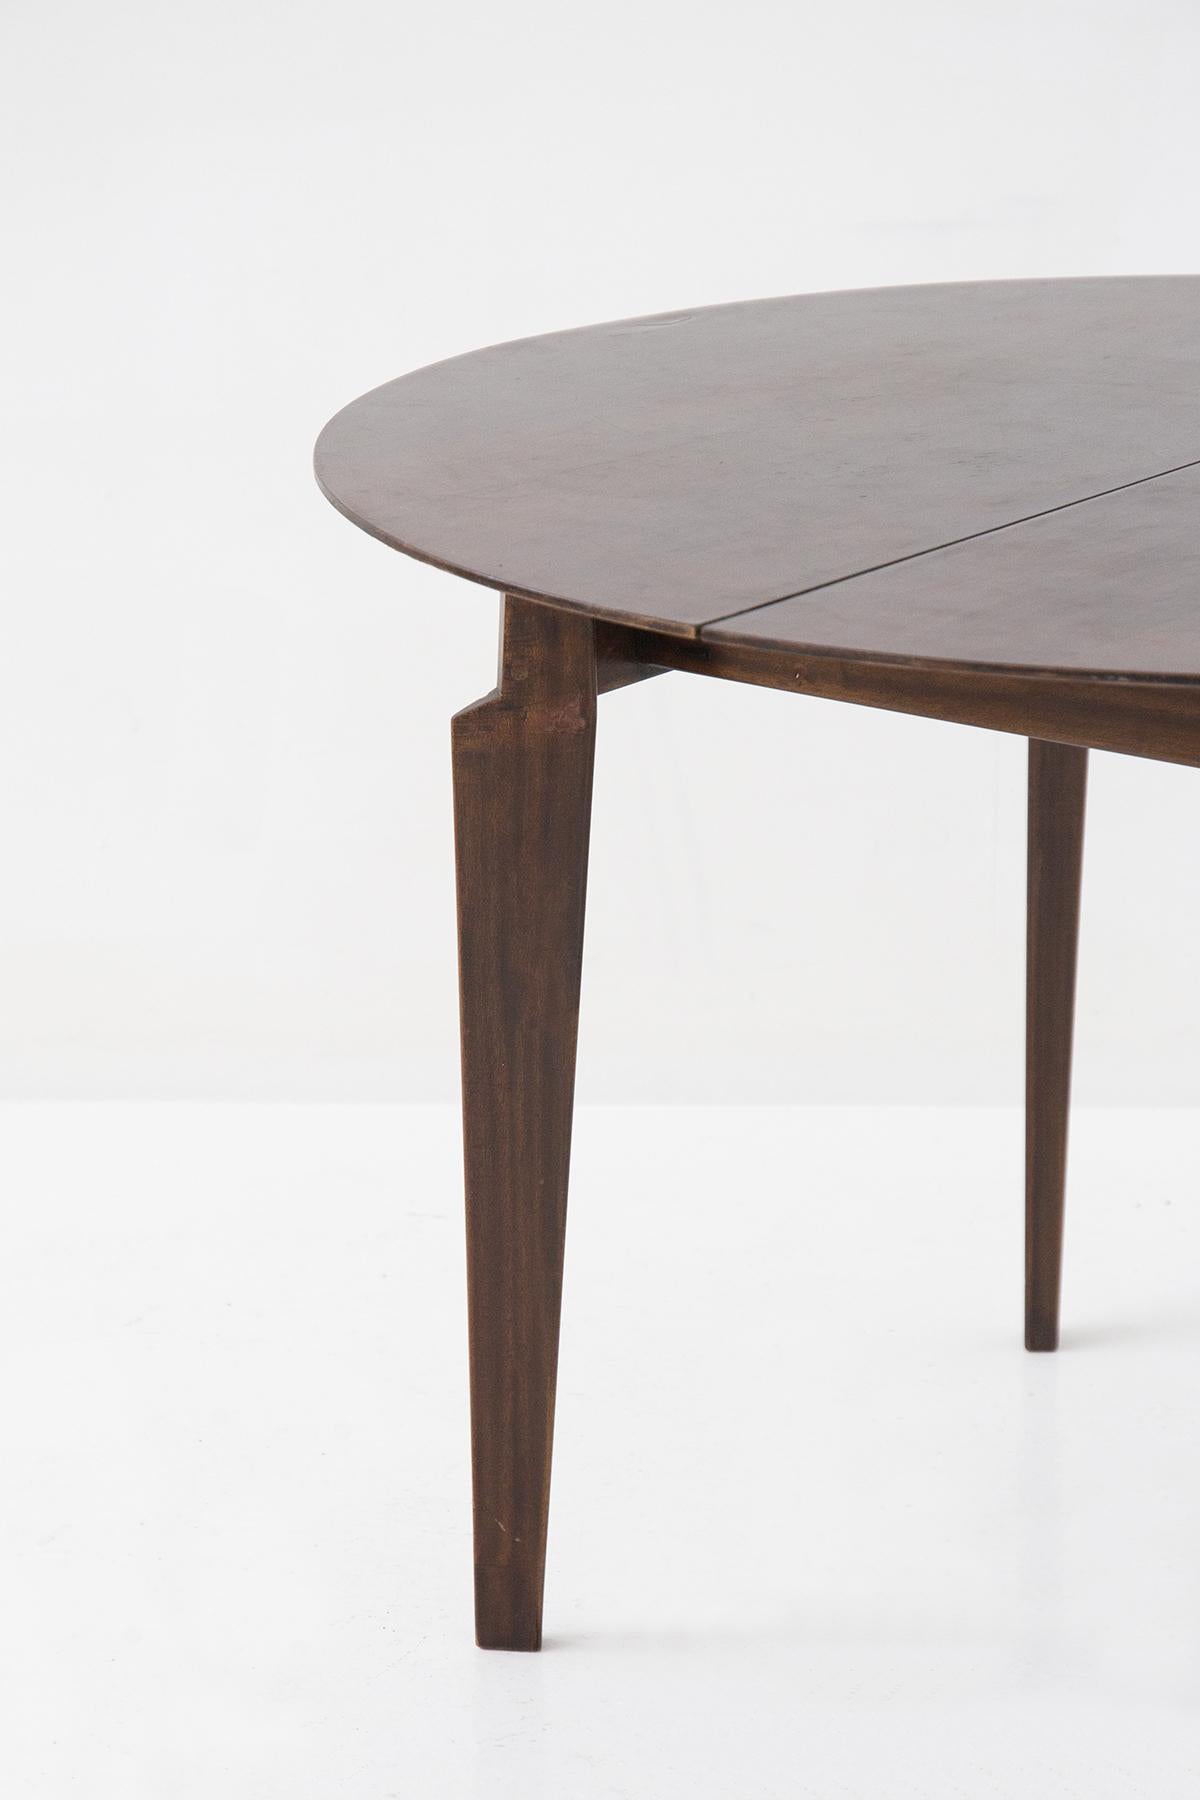 Beautiful 1950s round table of Italian manufacture Dassi designed by Edmundo Palutari.
The table is entirely made of a very dark brown wood, very elegant. There are 4 supporting legs of triangular shape, very distinctive and delicate. These legs